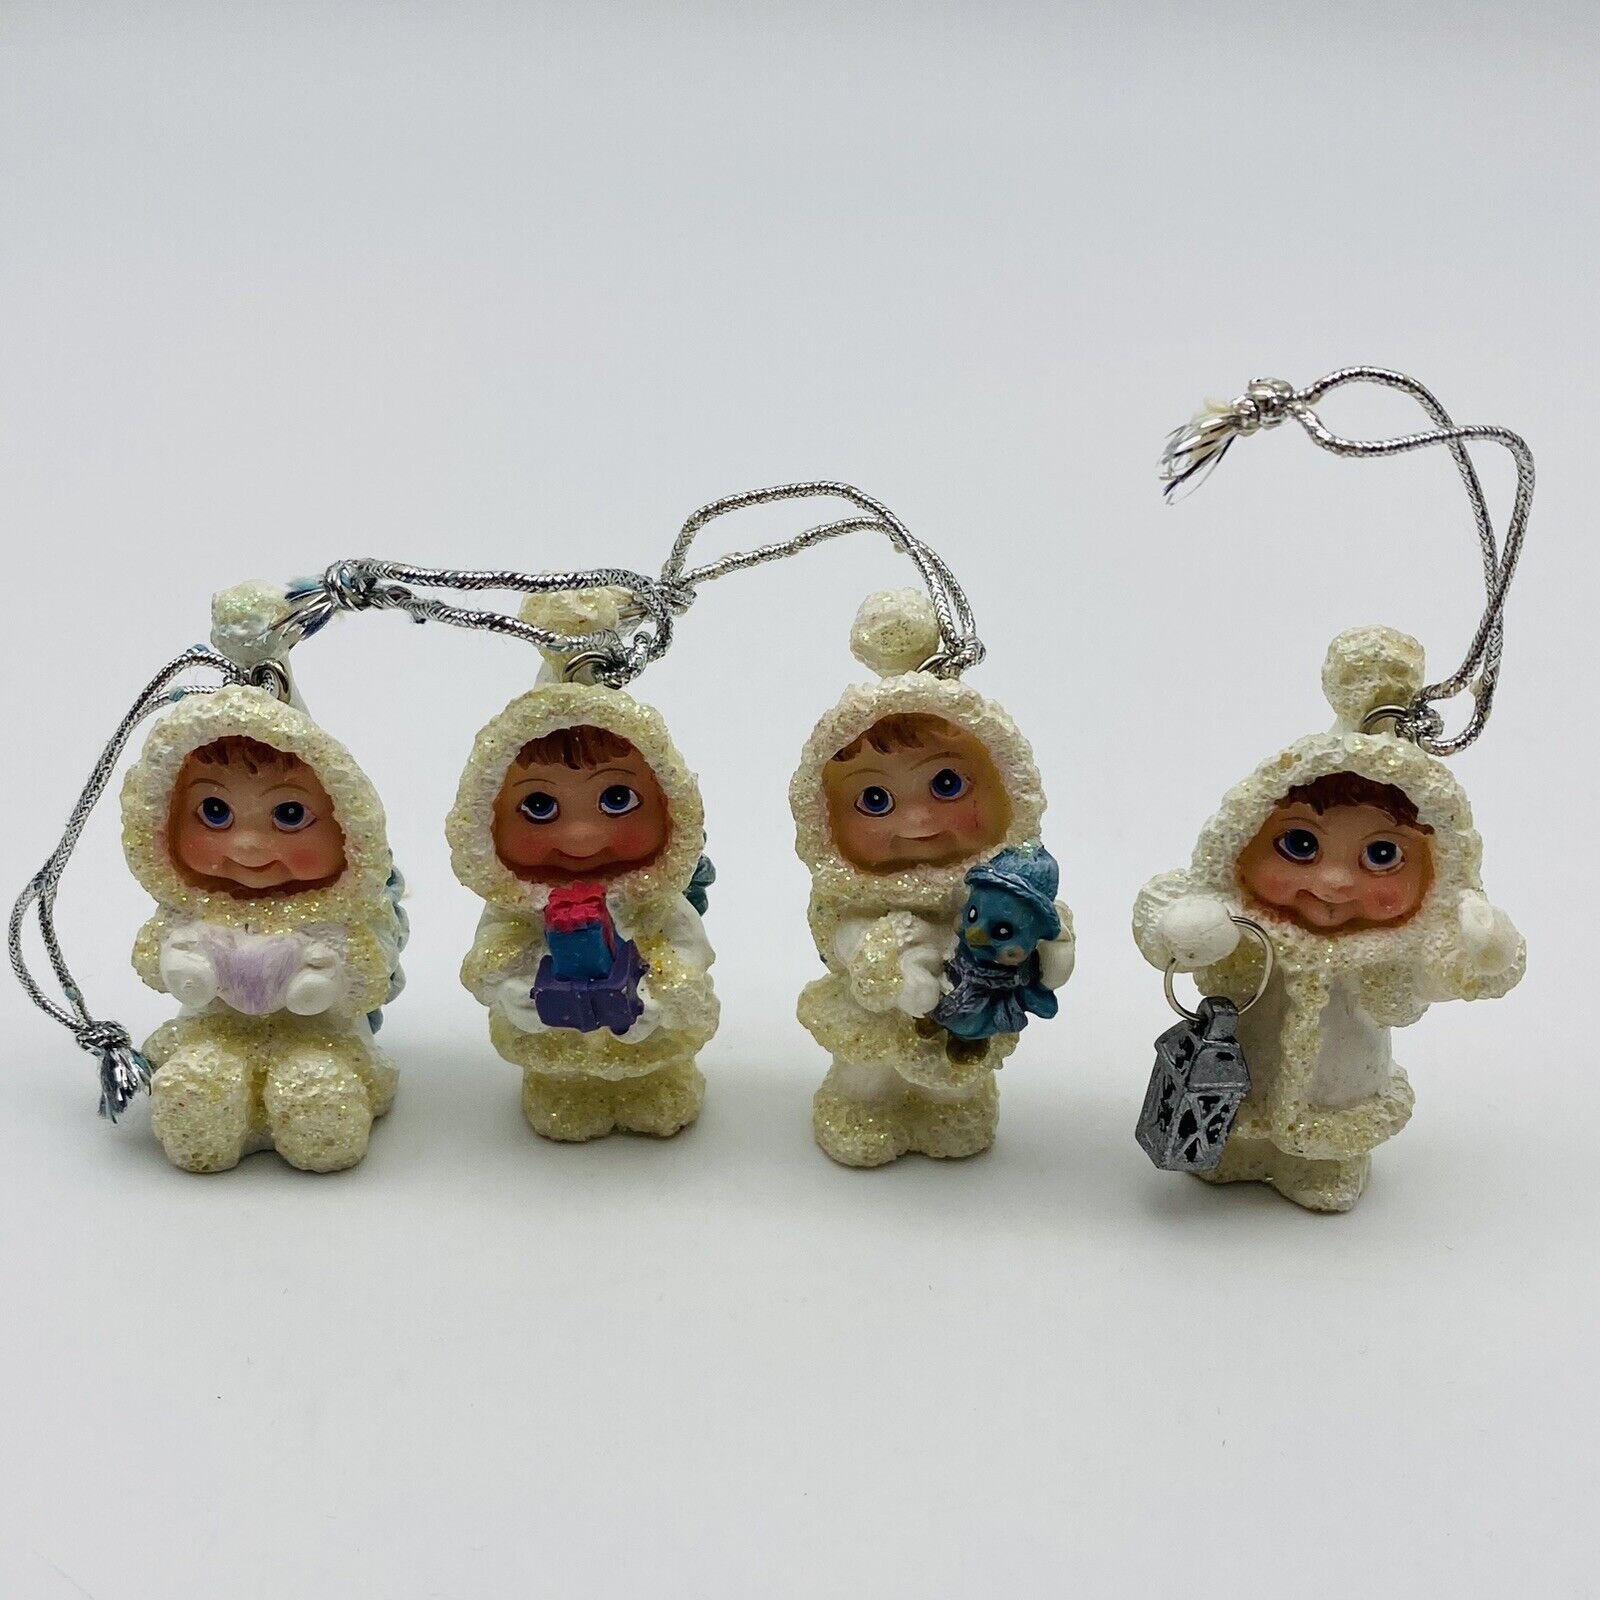 1998 DREAMSICLES Northern Lights Miniature Ornament figurines Set Of 4